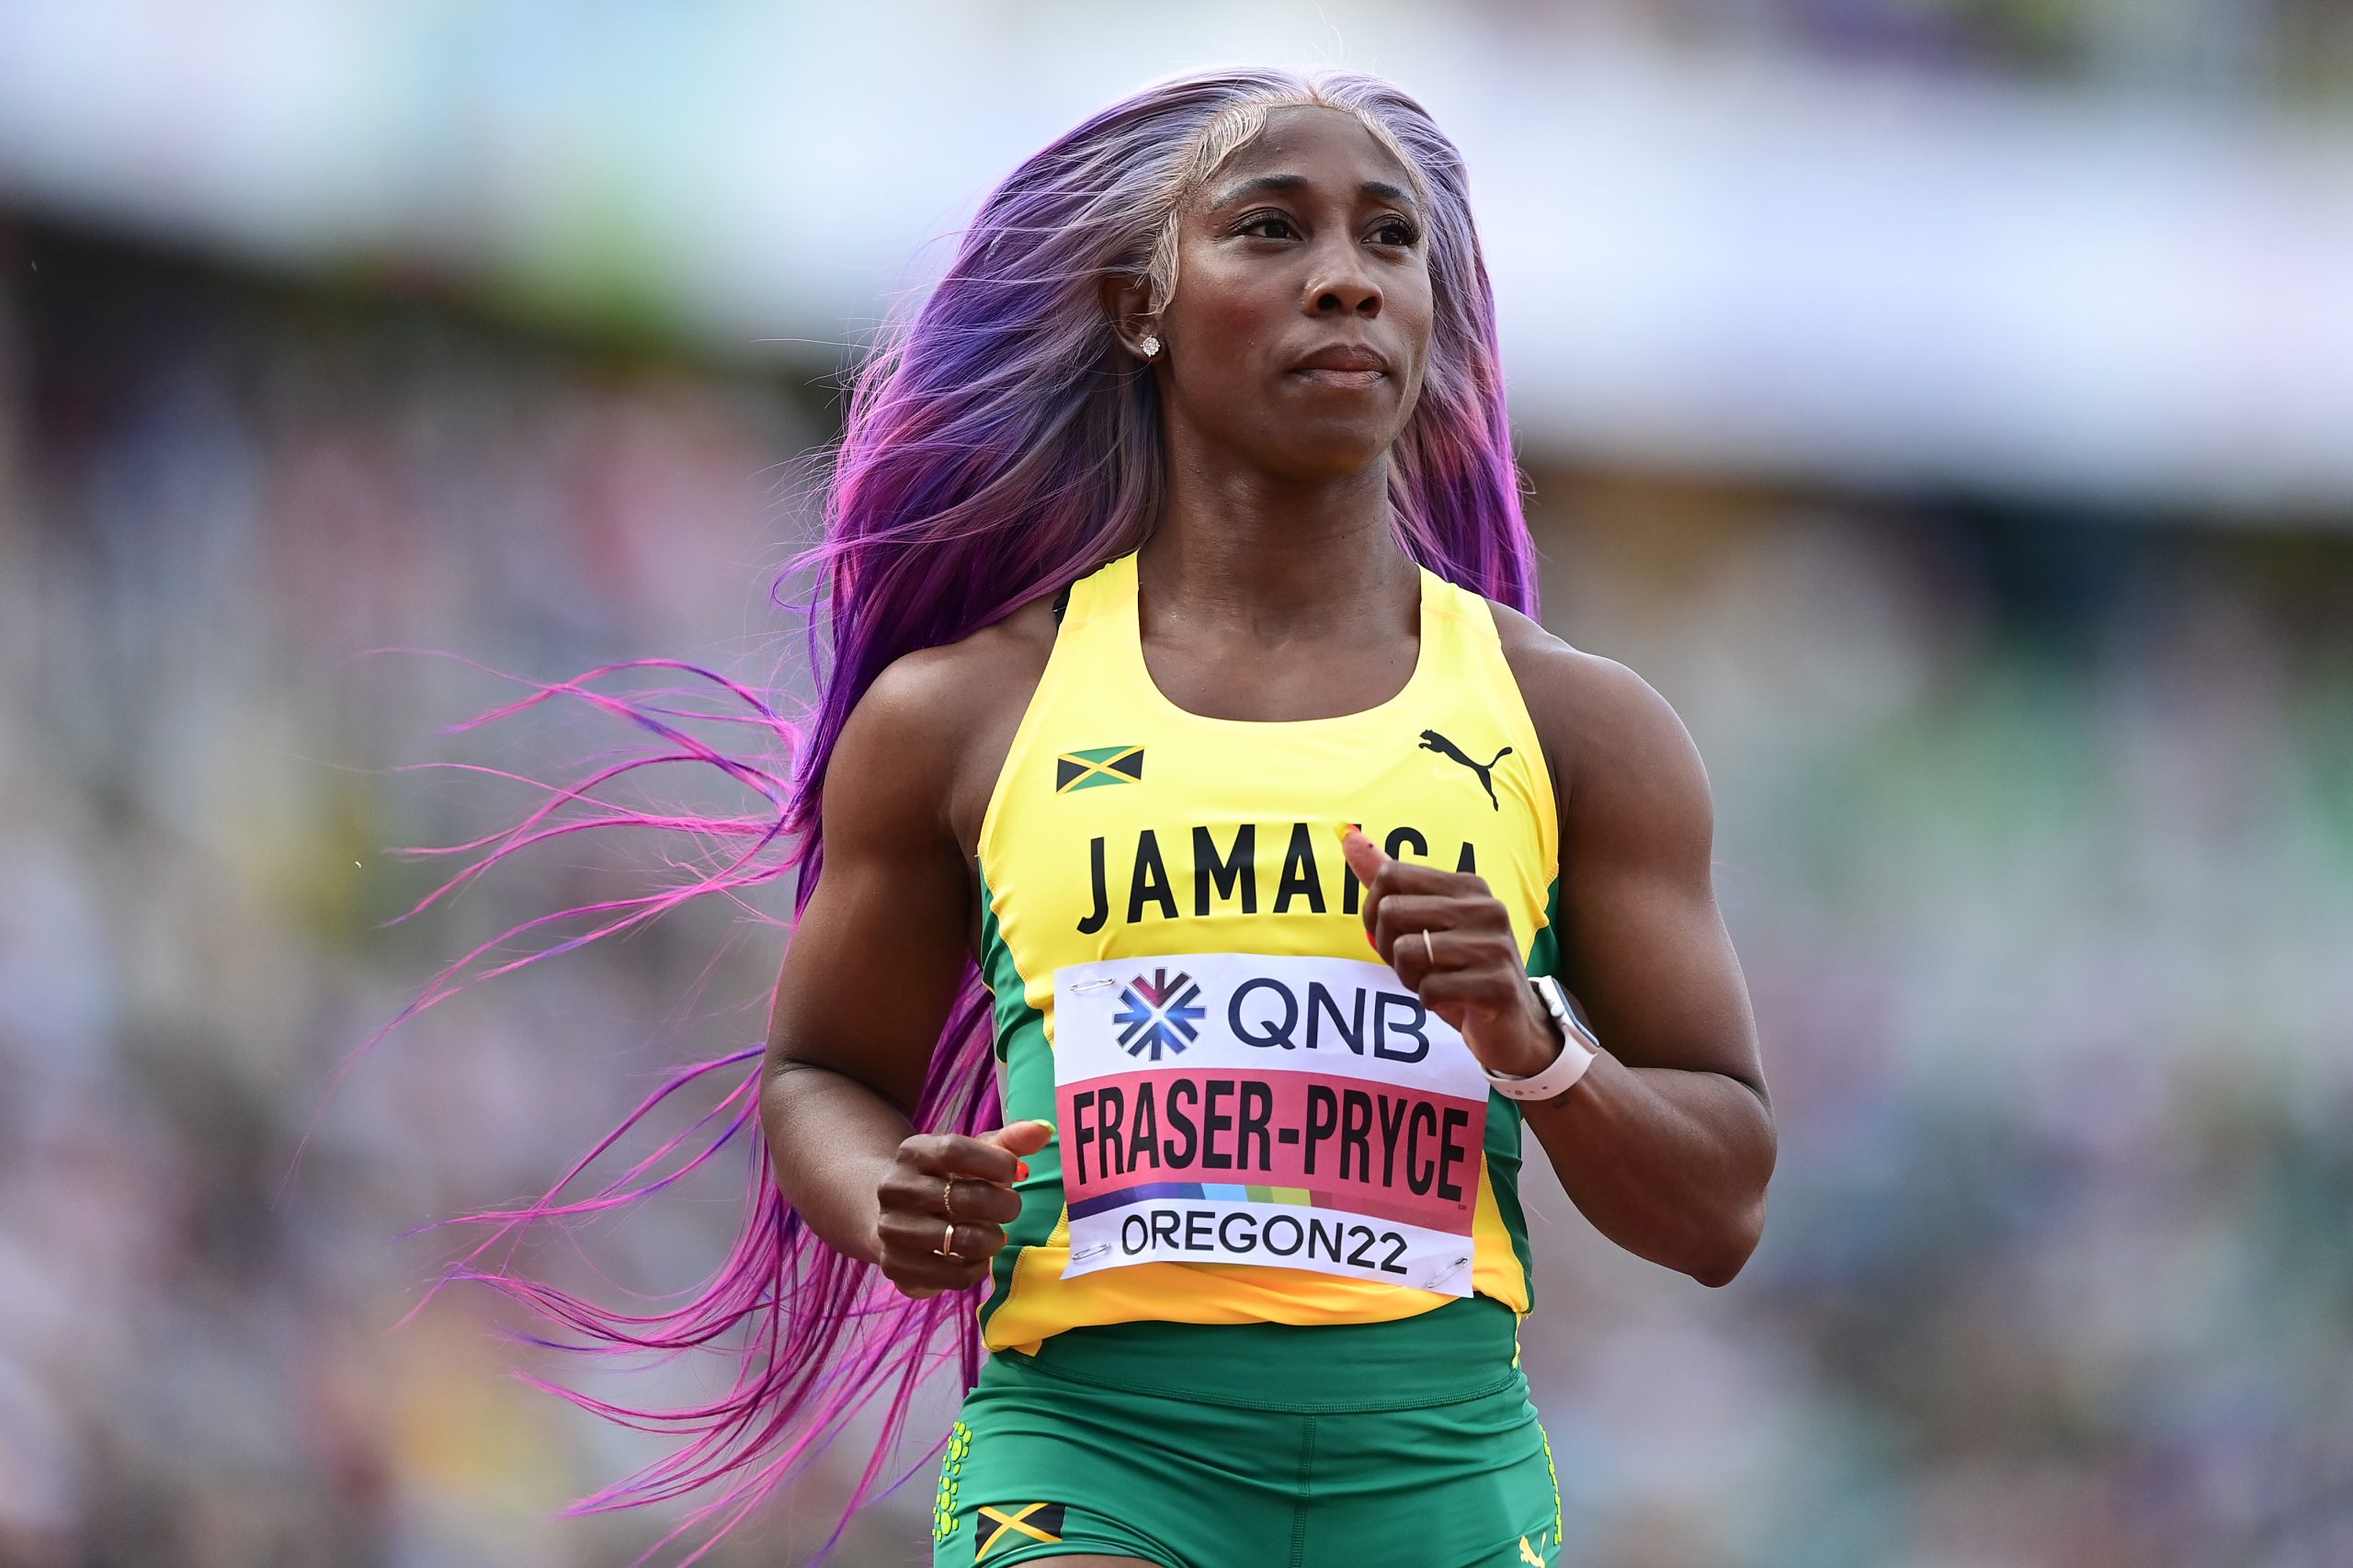 Shelly-Ann Fraser-Pryce is the best female sprinter of all time